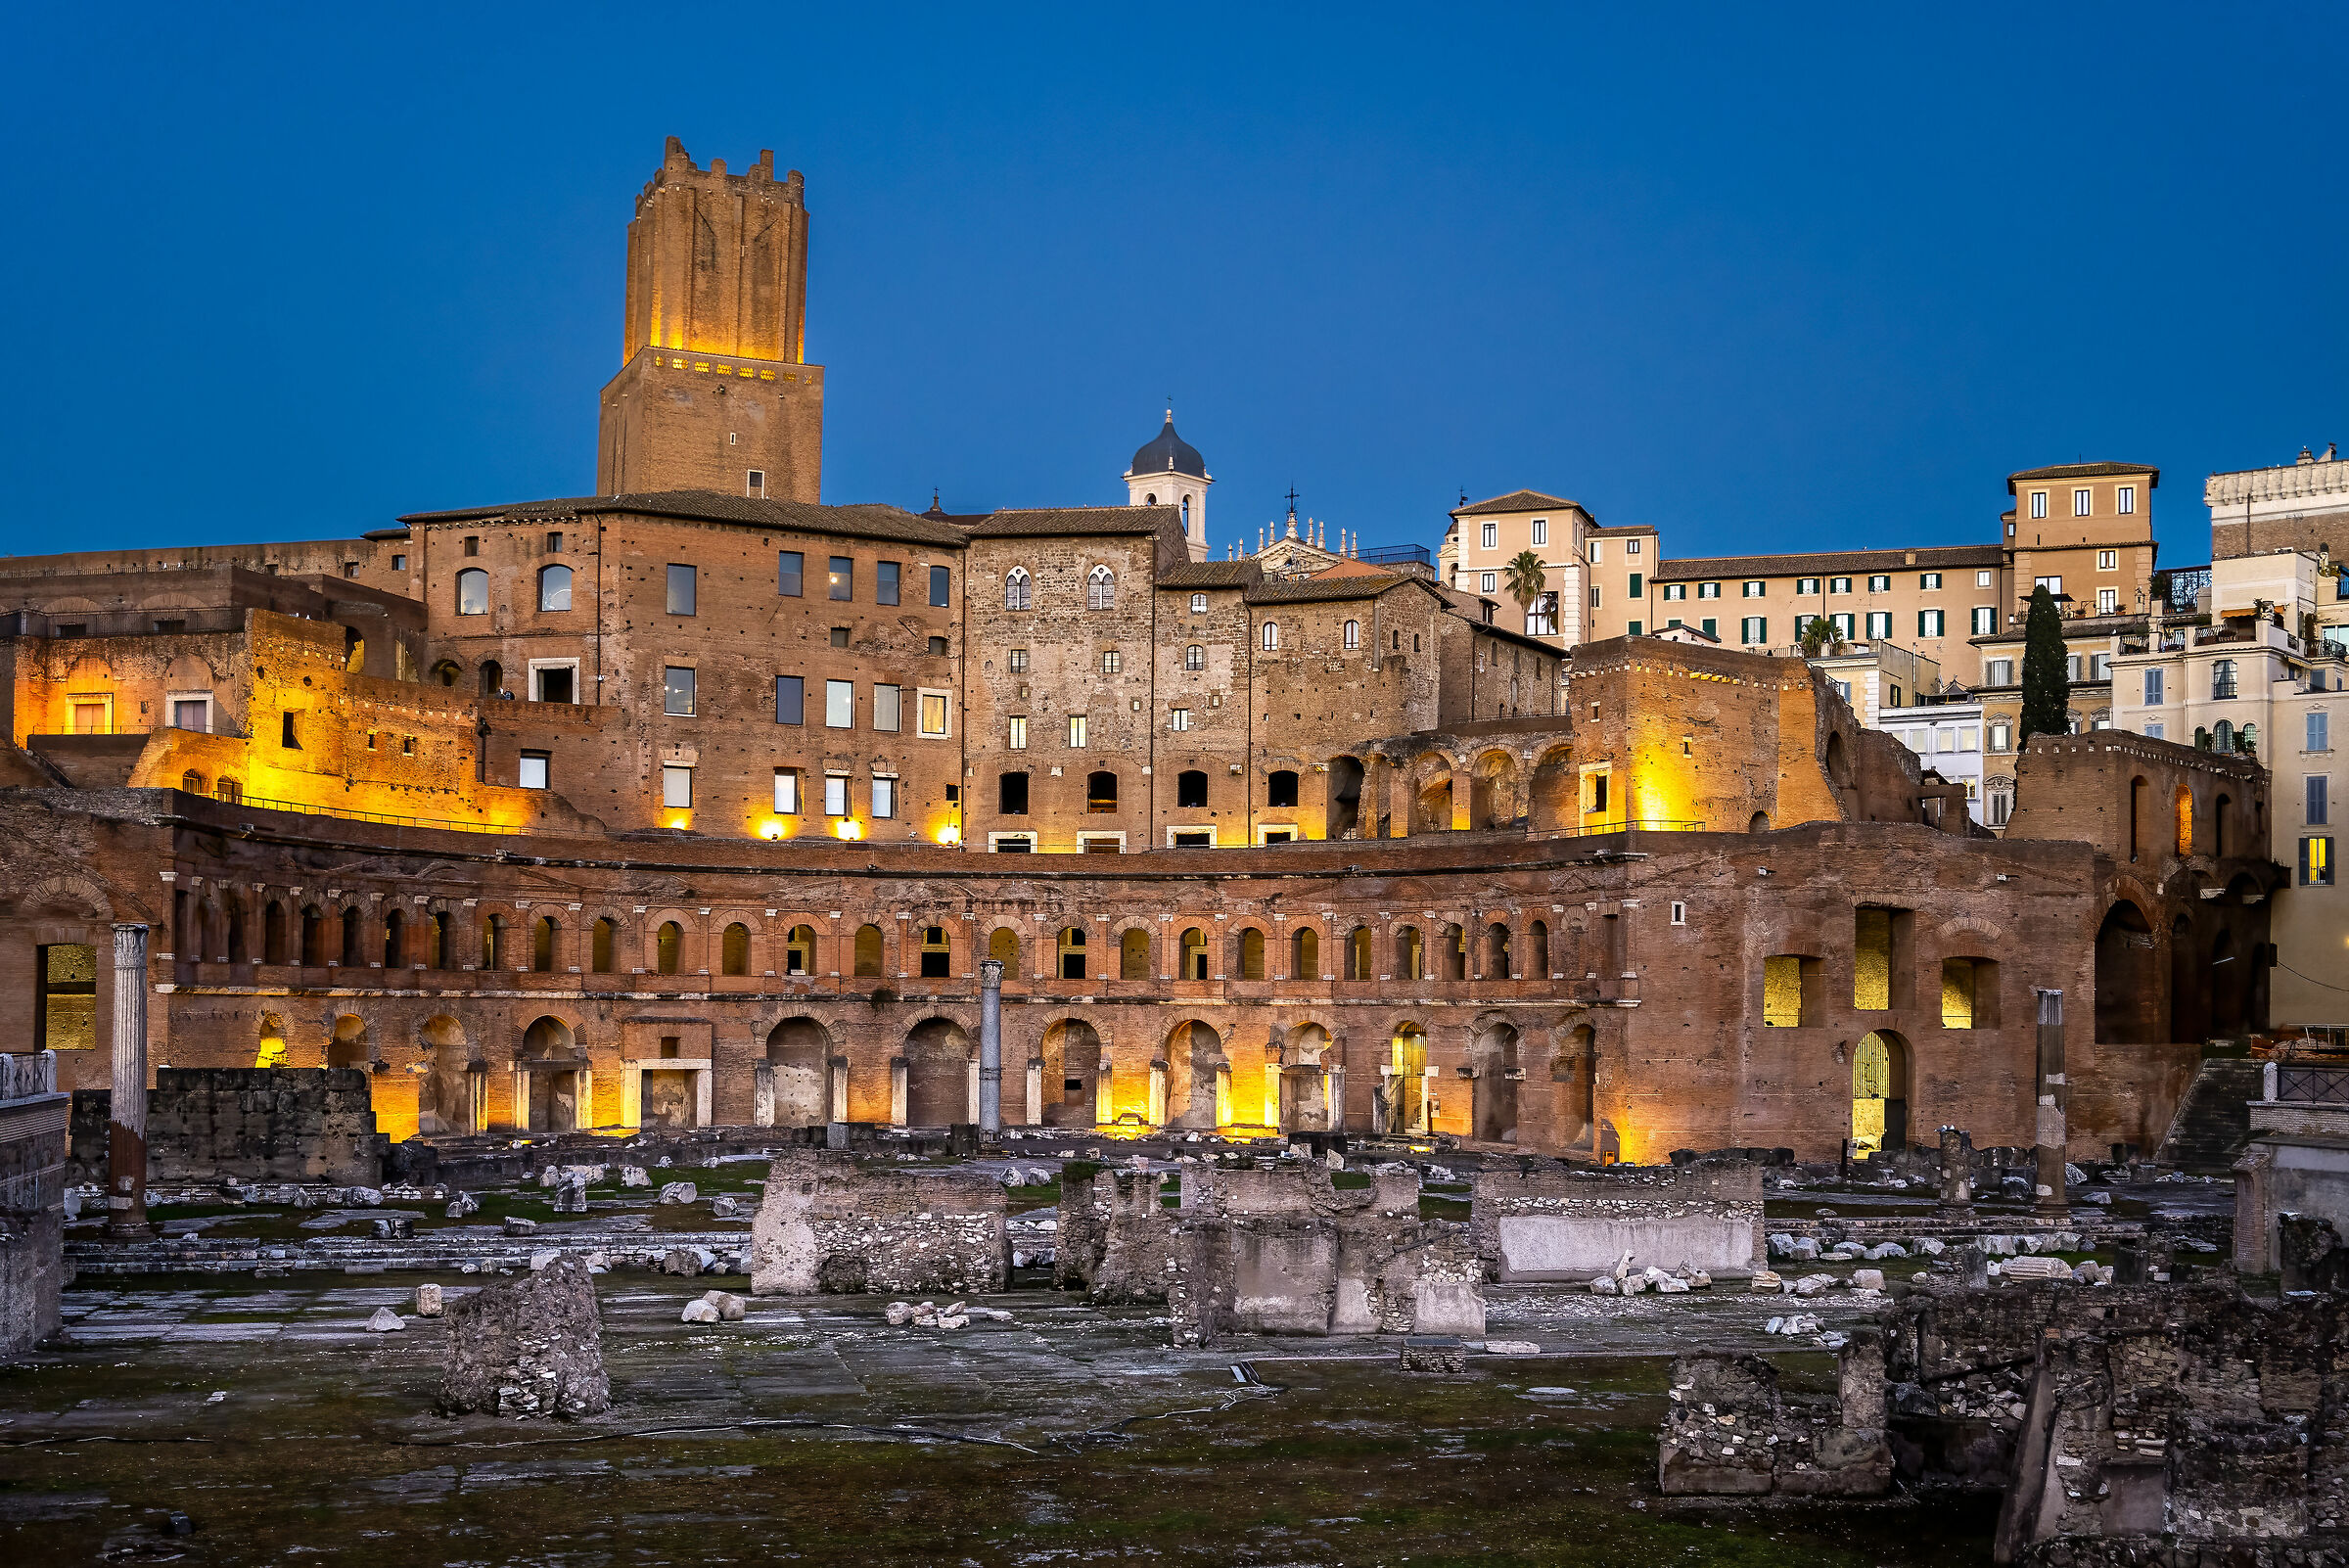 The markets of Trajan (emperor from 98 to 117 AD)...